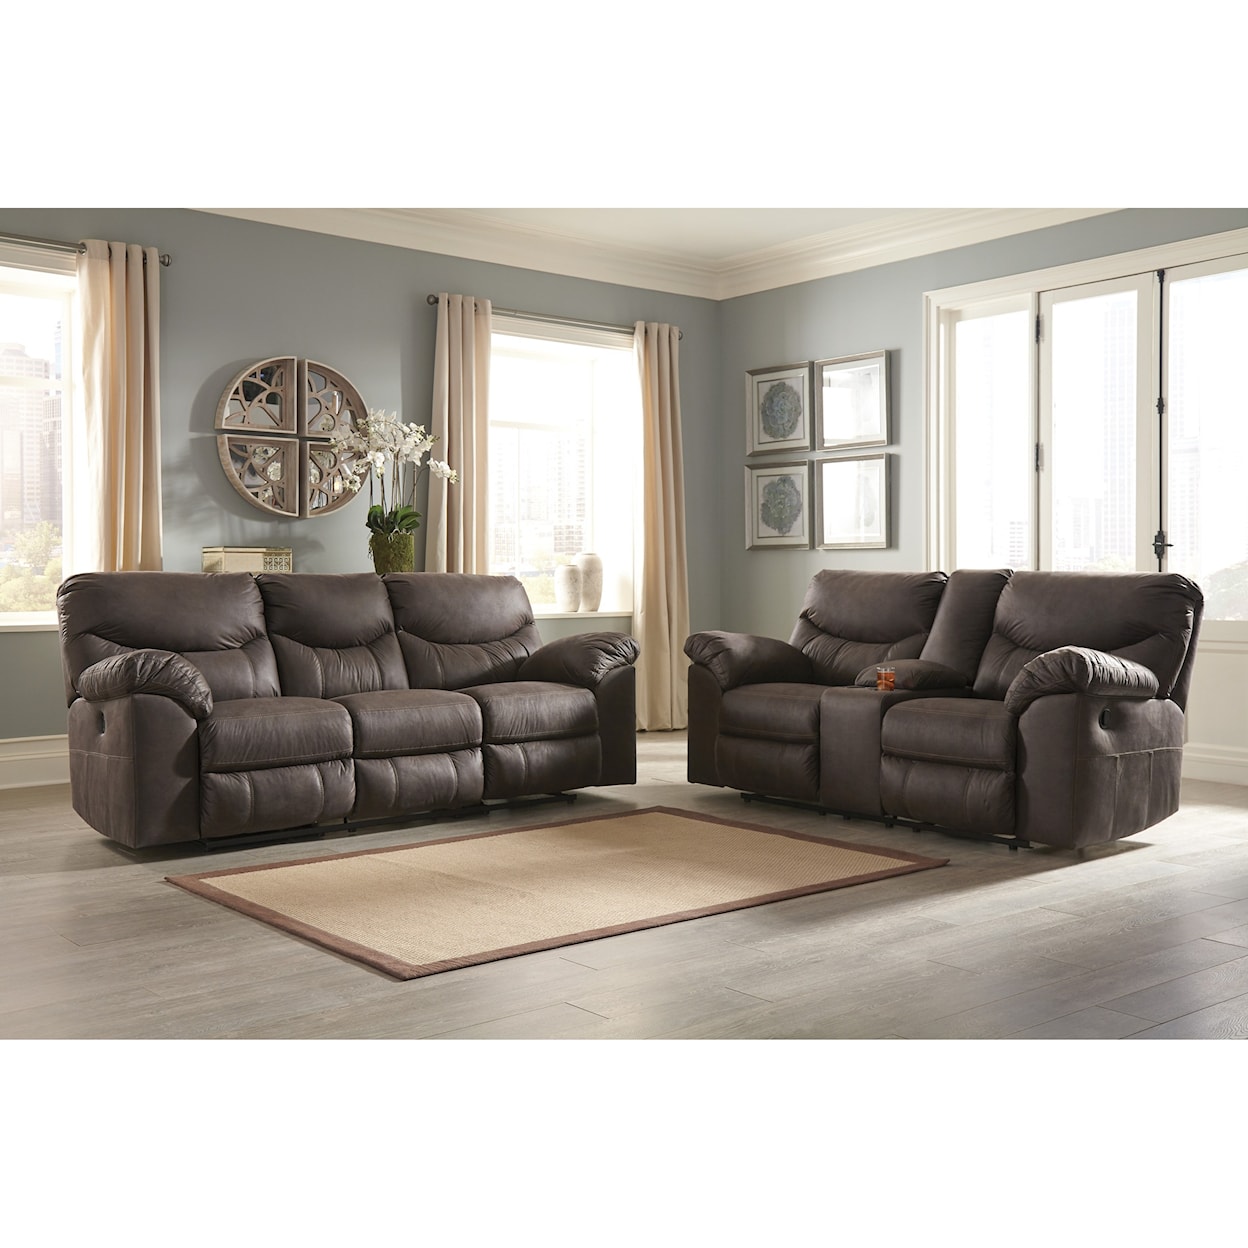 Signature Design by Ashley Furniture Boxberg Reclining Living Room Group